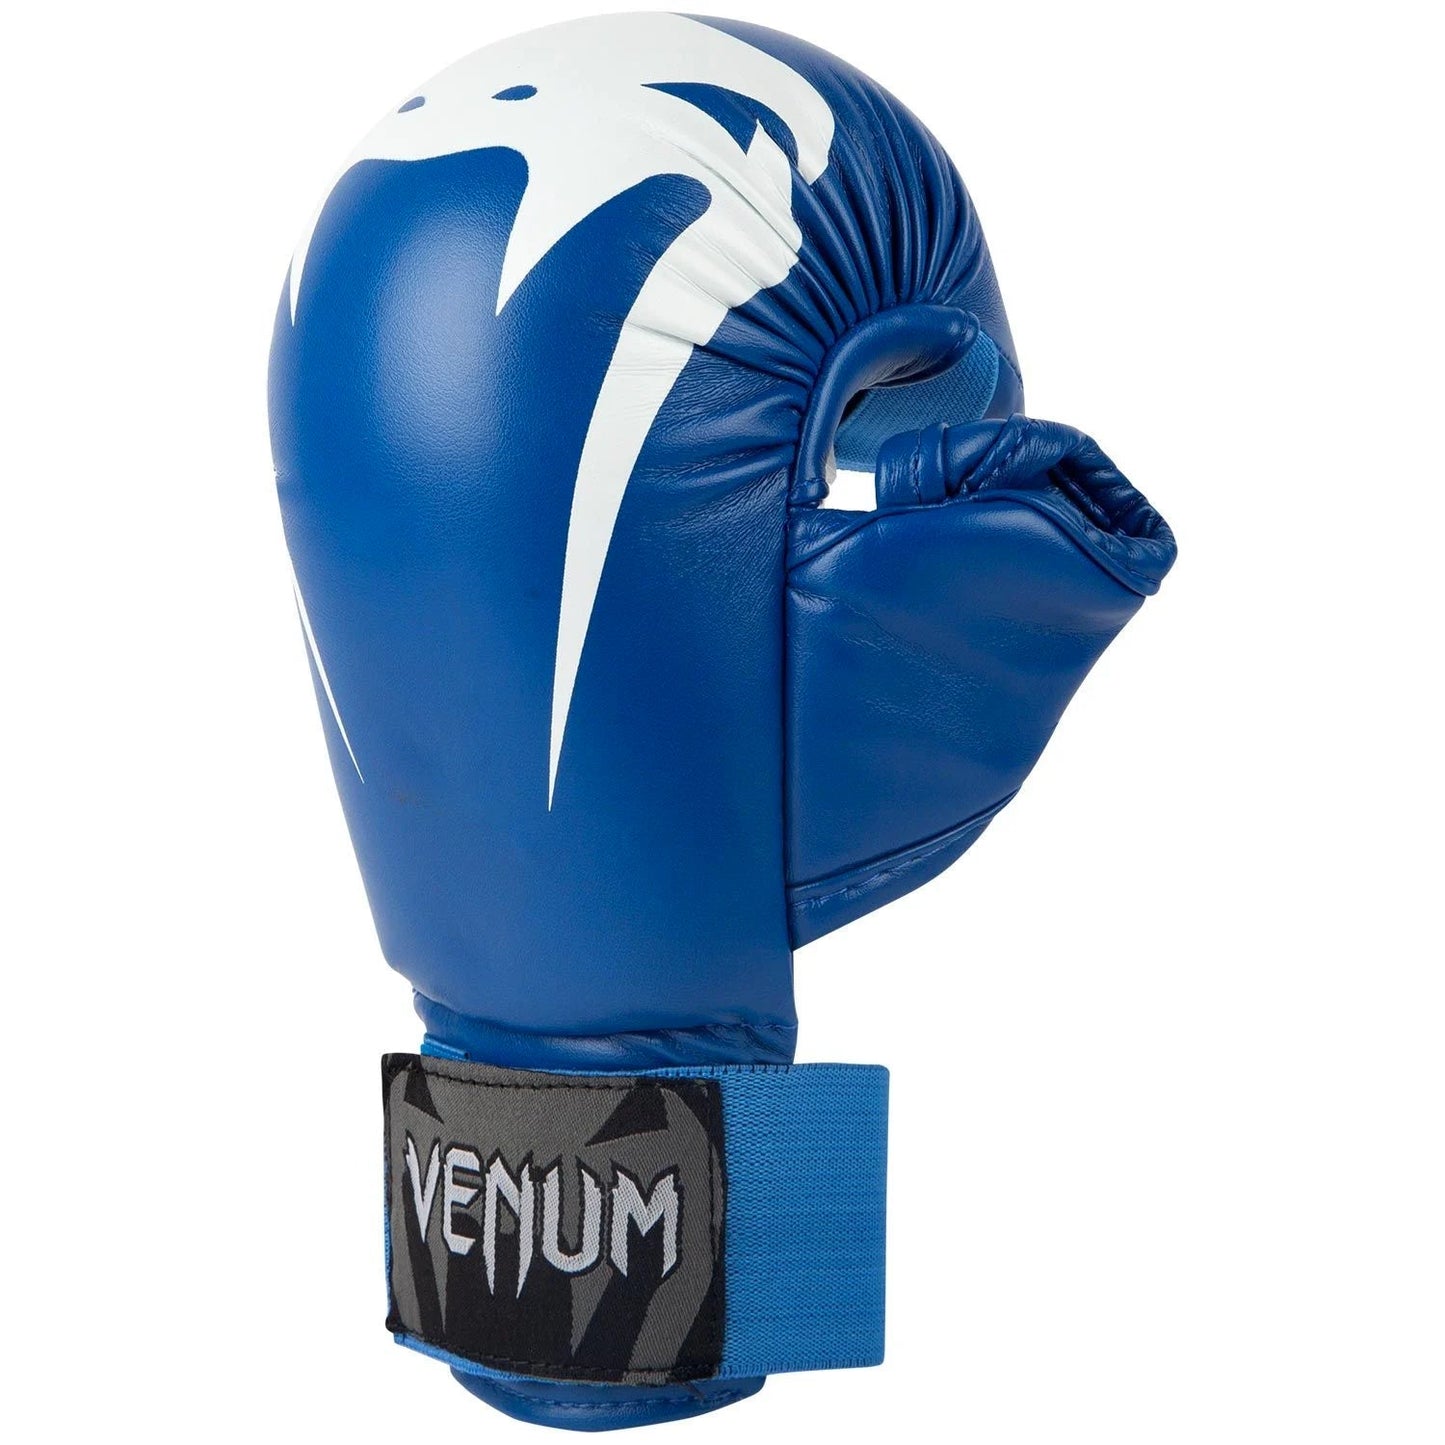 Venum Giant Karate Mitts - With Thumbs - Blue